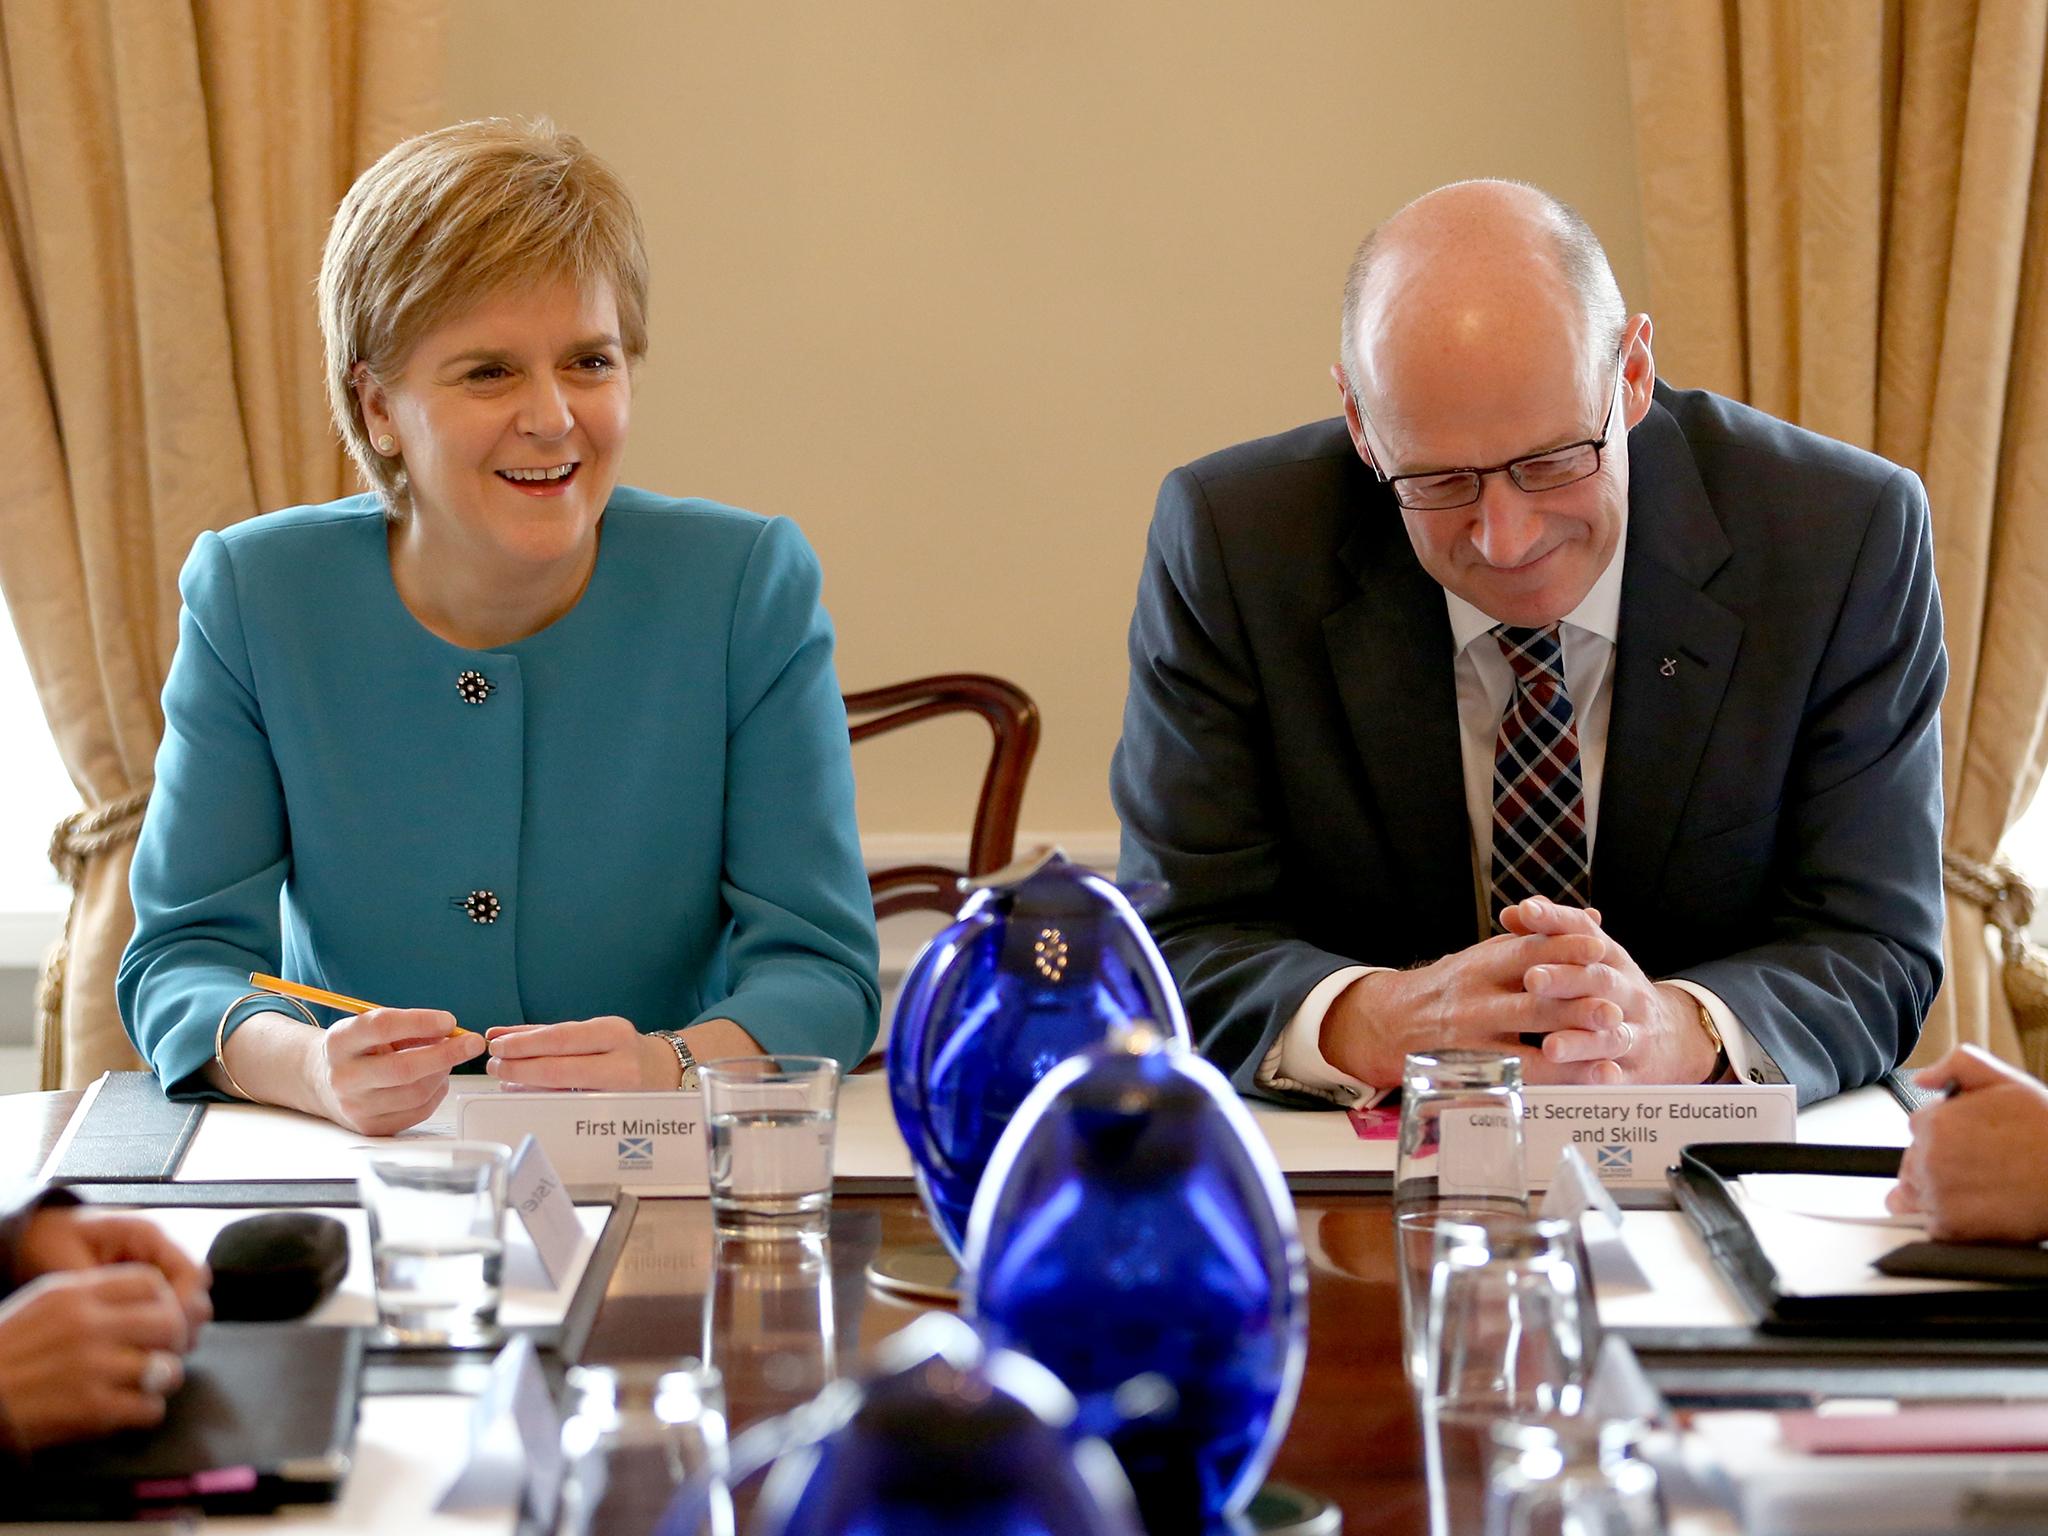 The SNP will cite rules which make clear the official opposition to the UK Government must be 'prepared to assume power'